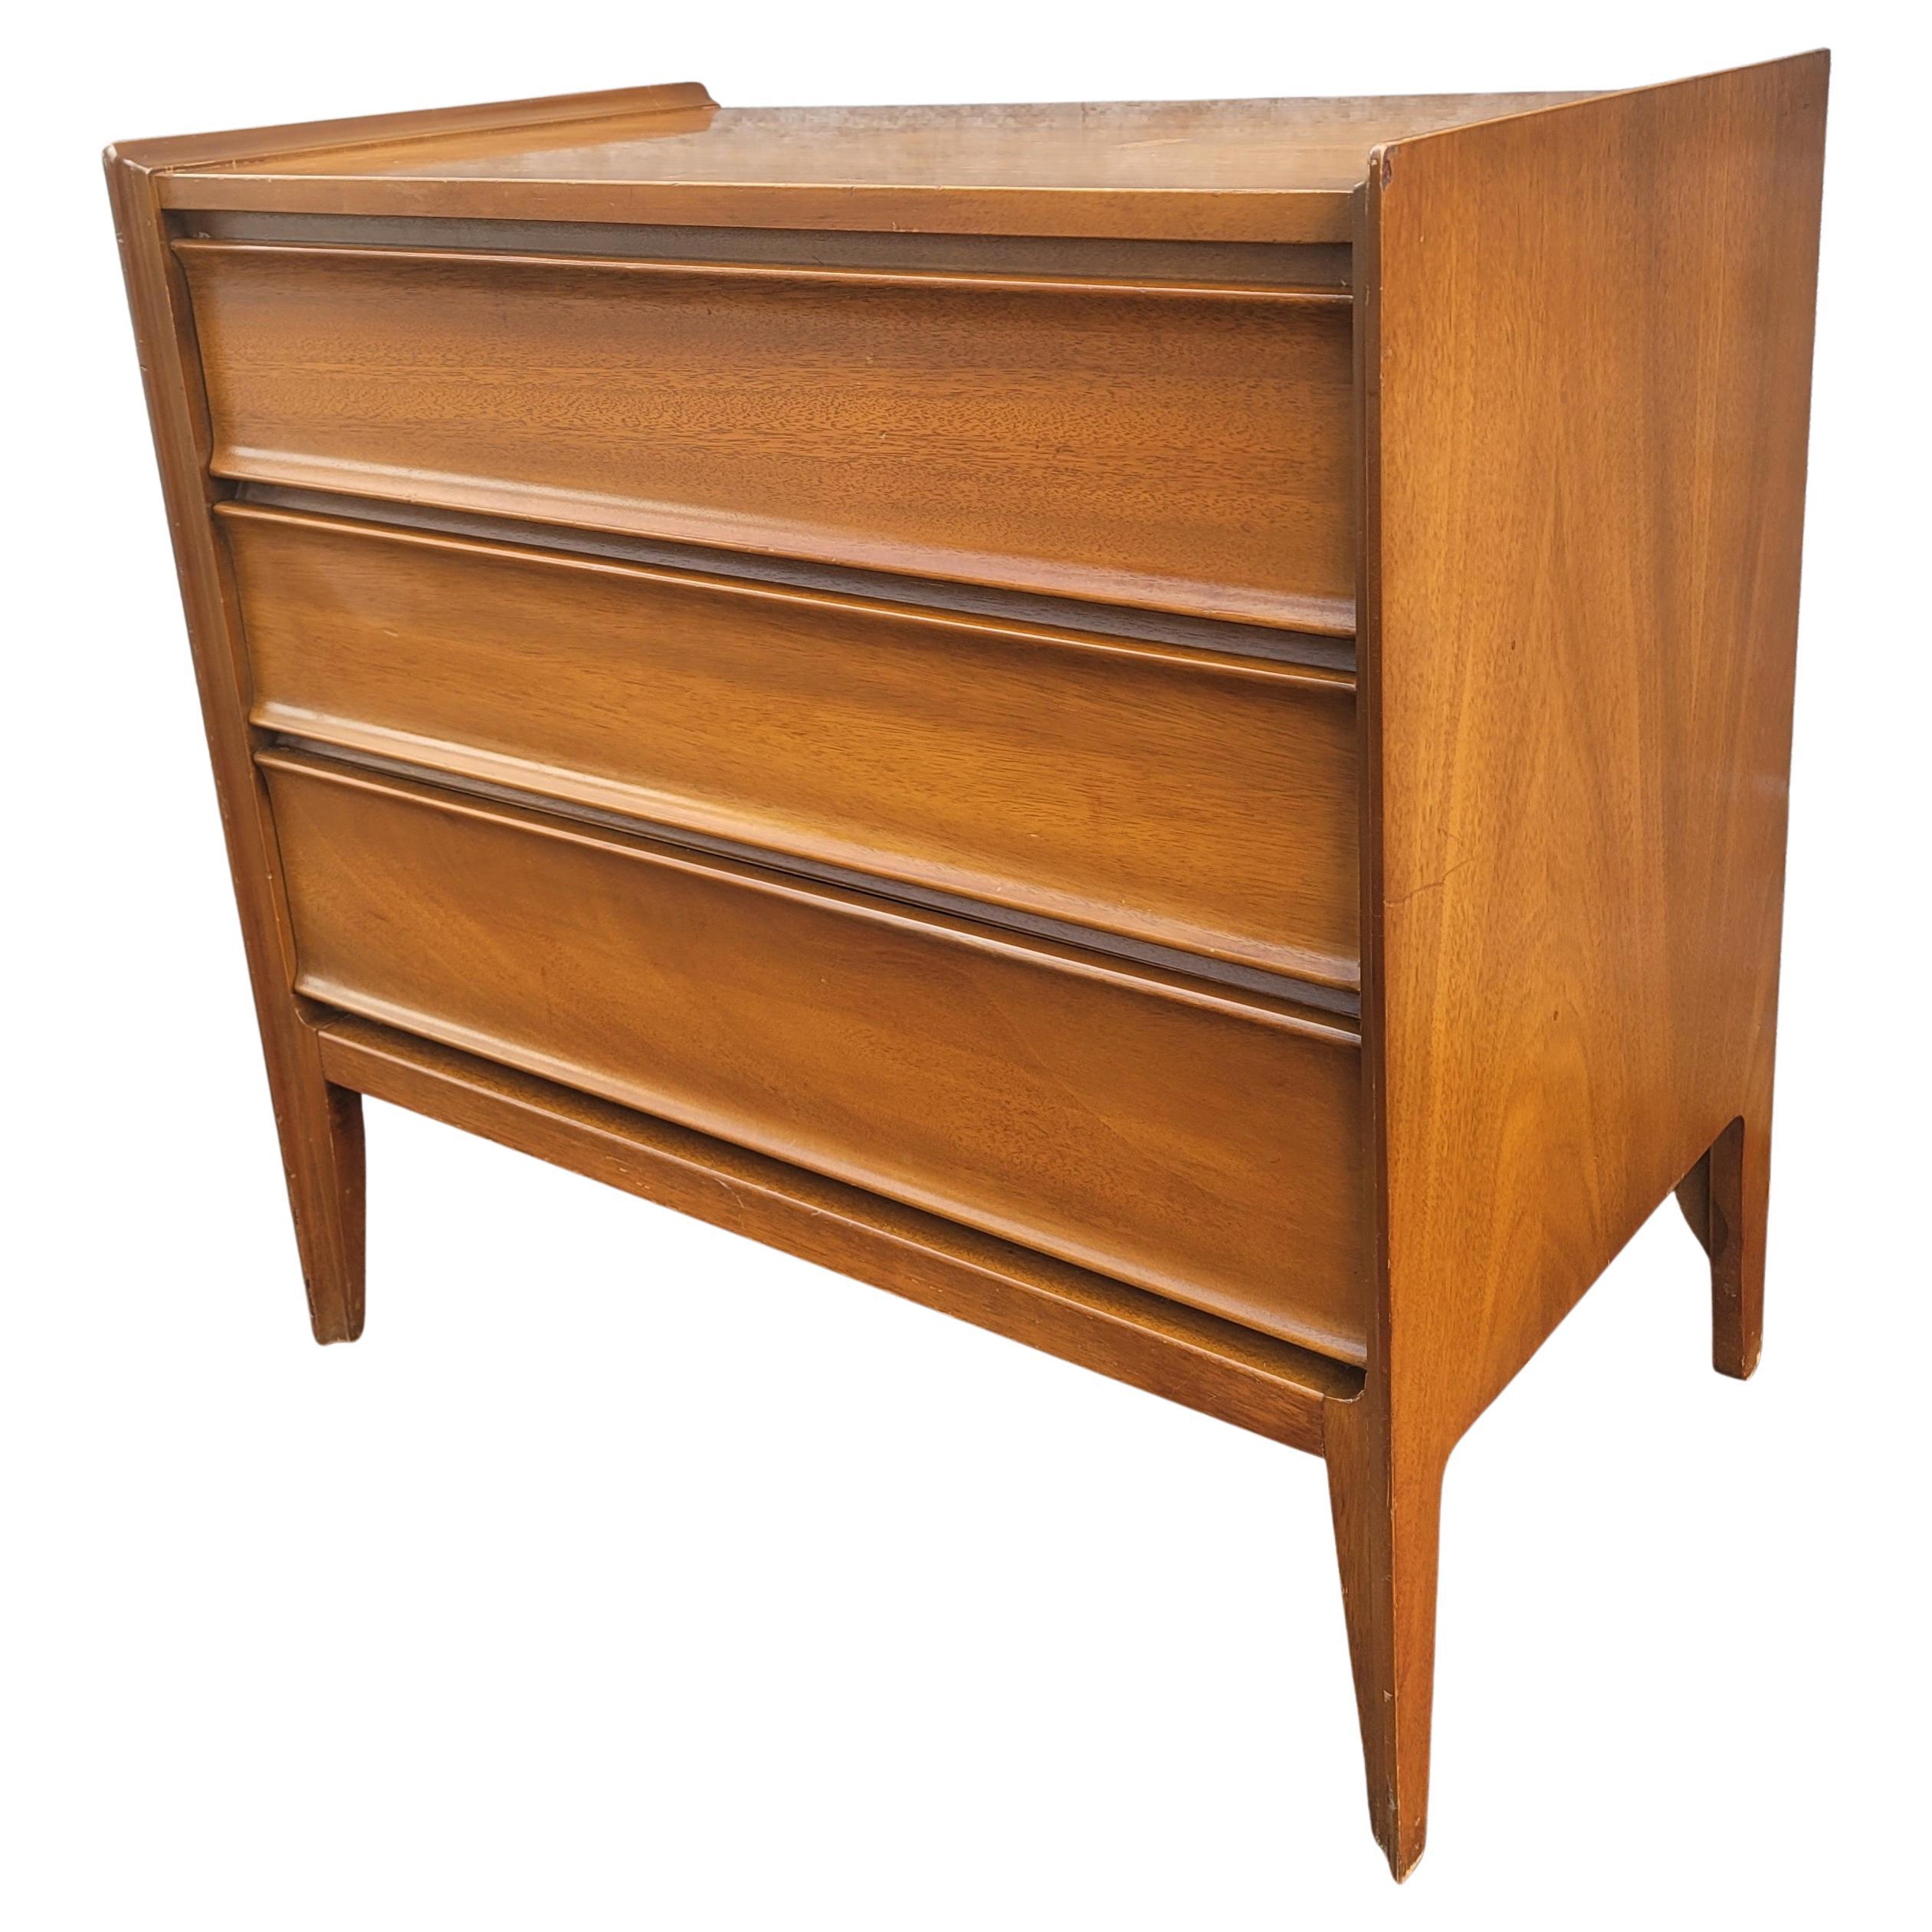 Woodwork 1950s Mid-Century Danish Modern Teak United Furniture Chest of Drawers For Sale